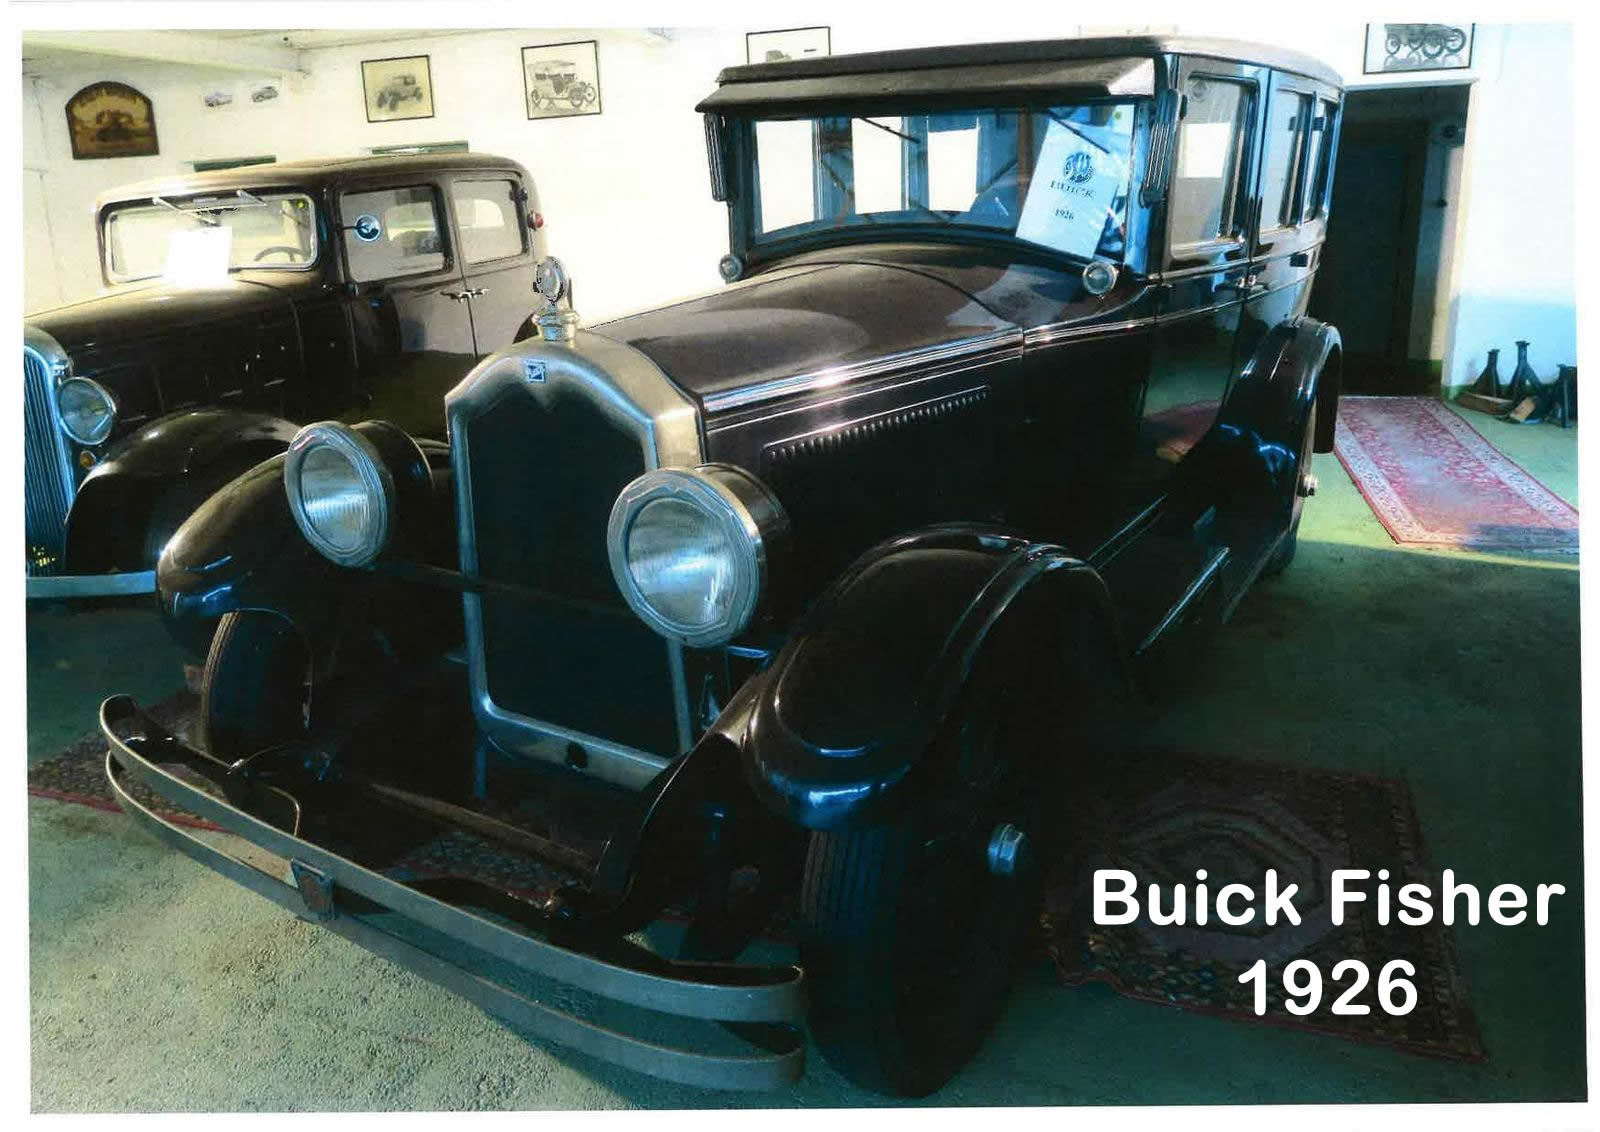 16 Buick Fisher 1926